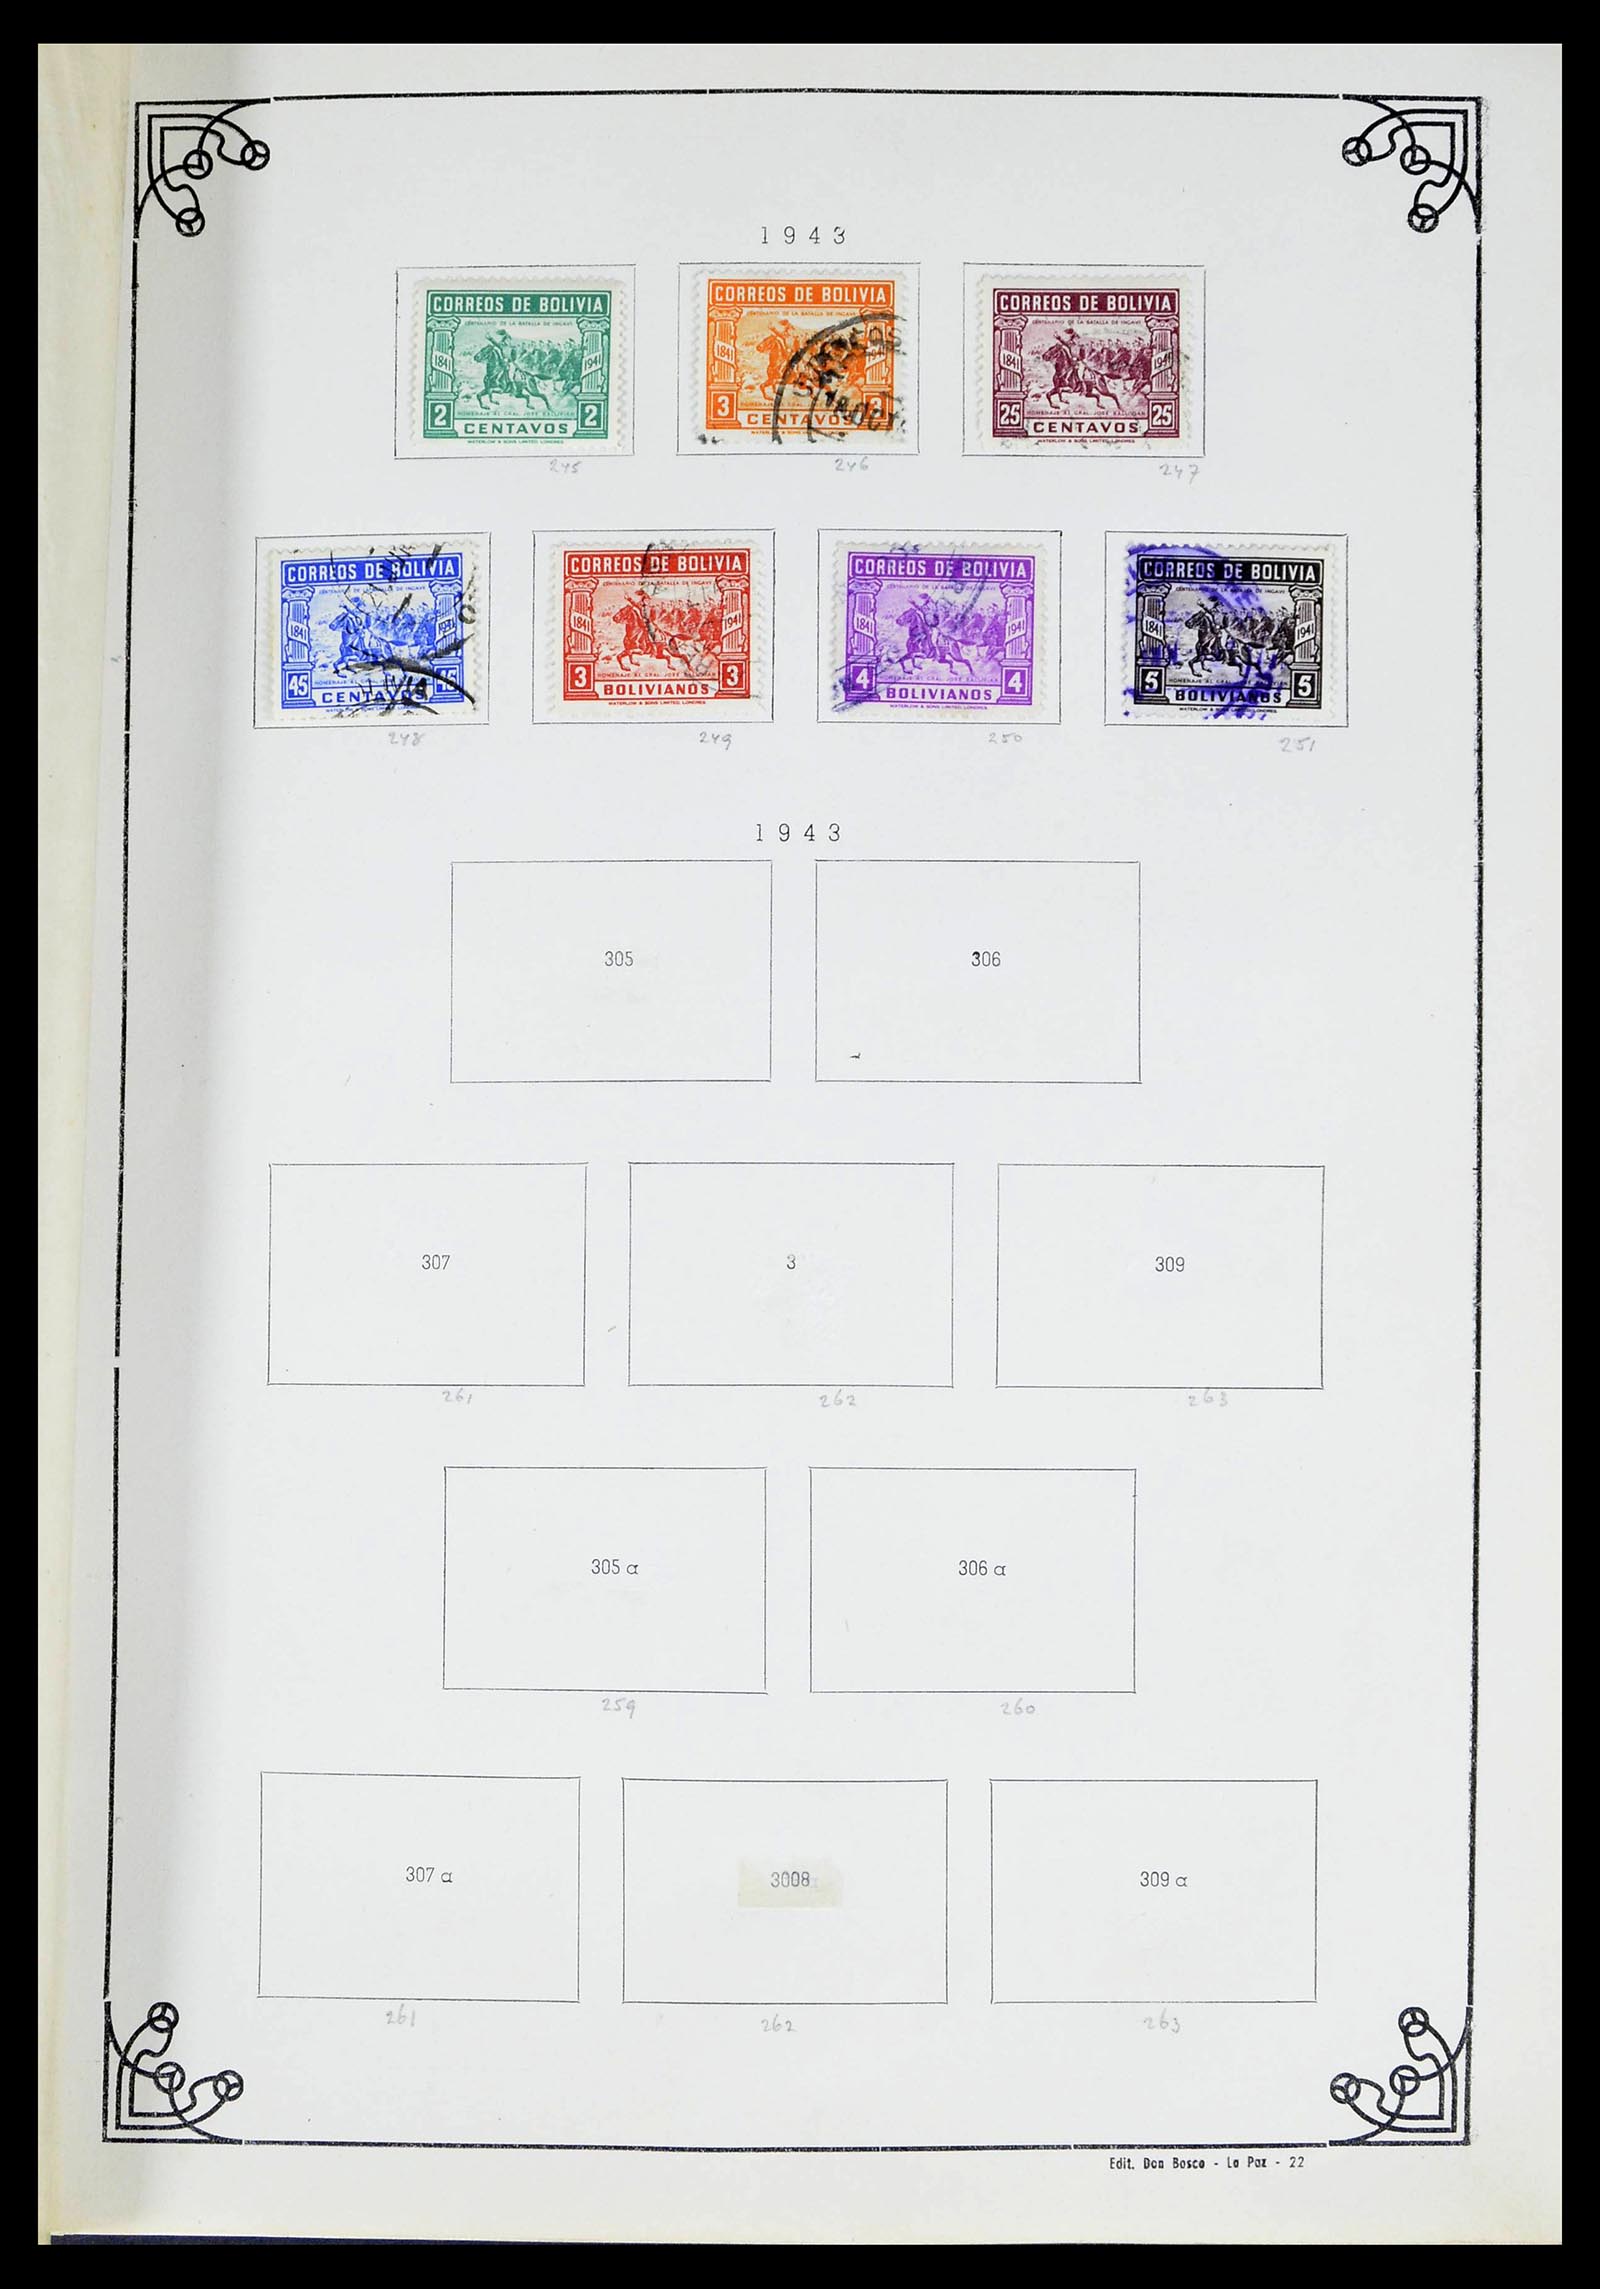 39224 0030 - Stamp collection 39224 Bolivia 1849-1955.